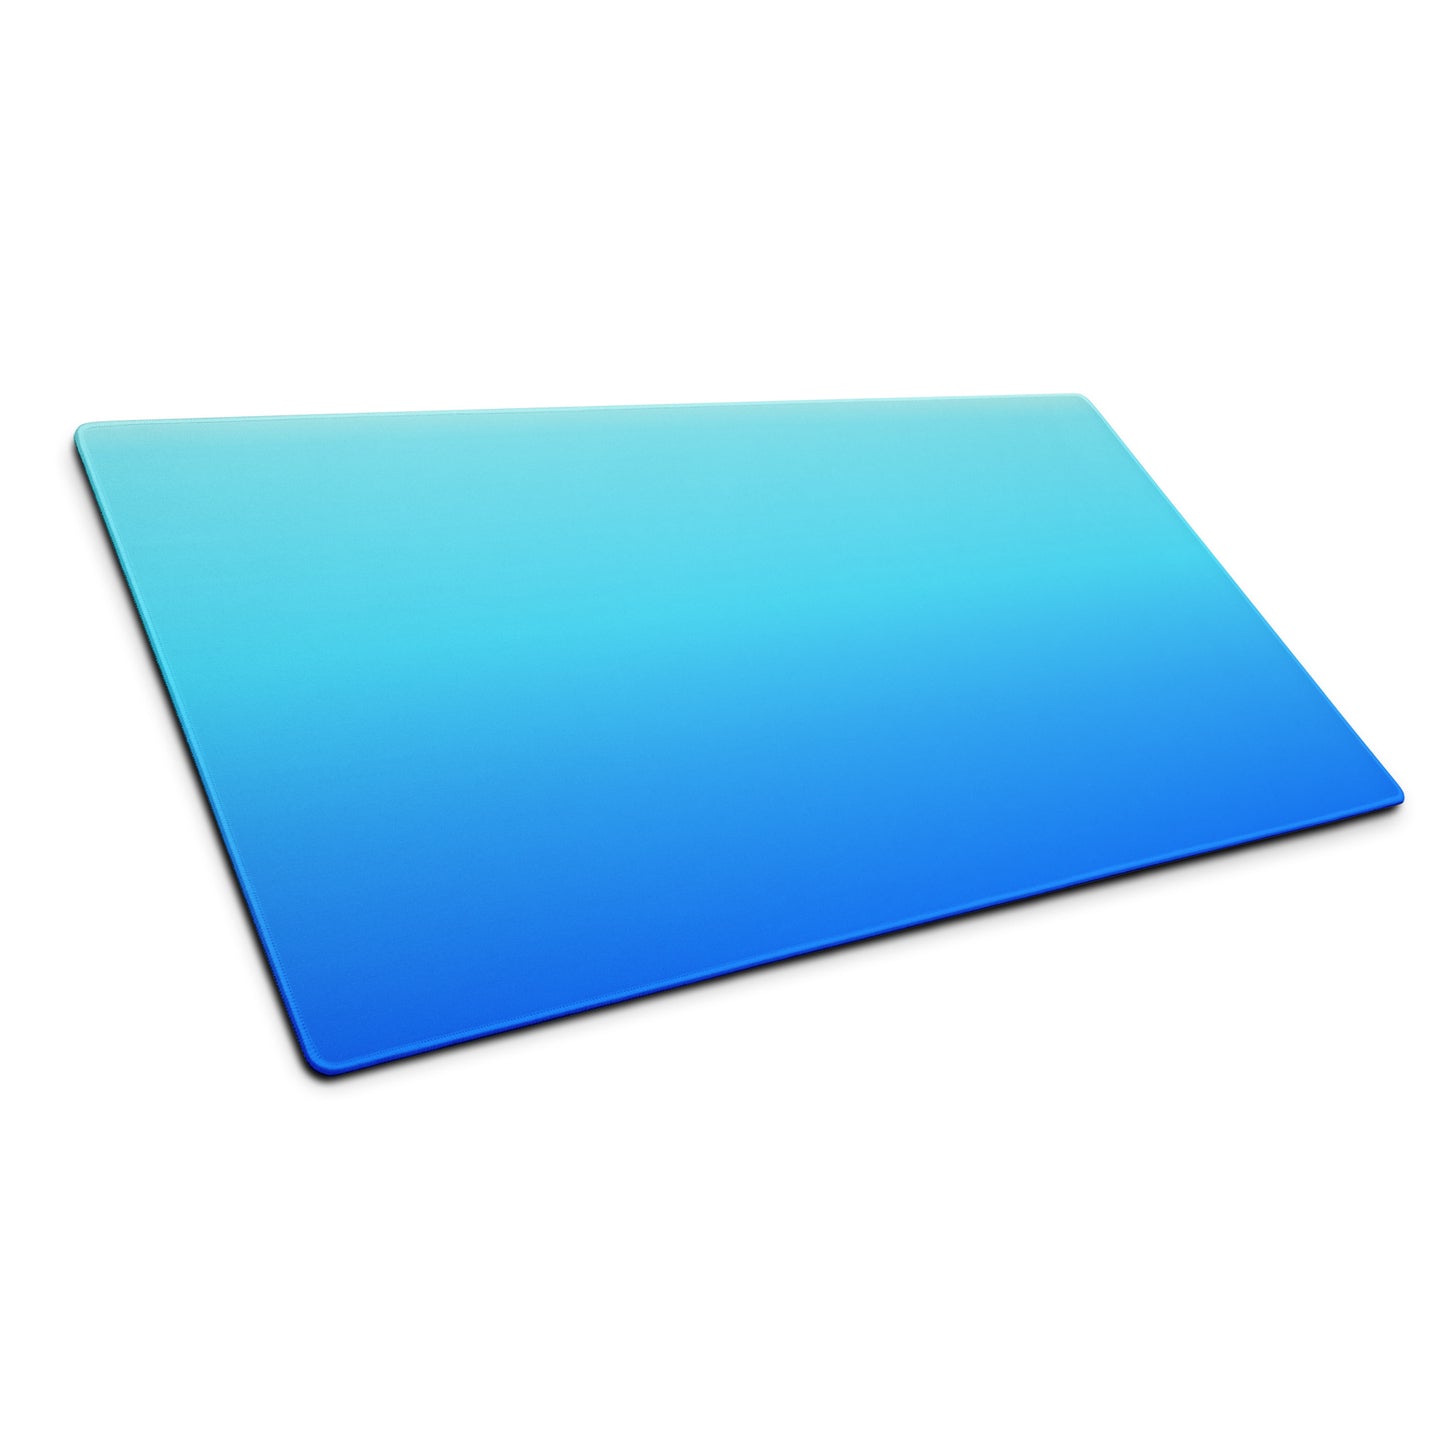 A 36" x 18" gaming desk pad with dark blue at the bottom and light blue at the top. The desk pad sits at an angle.